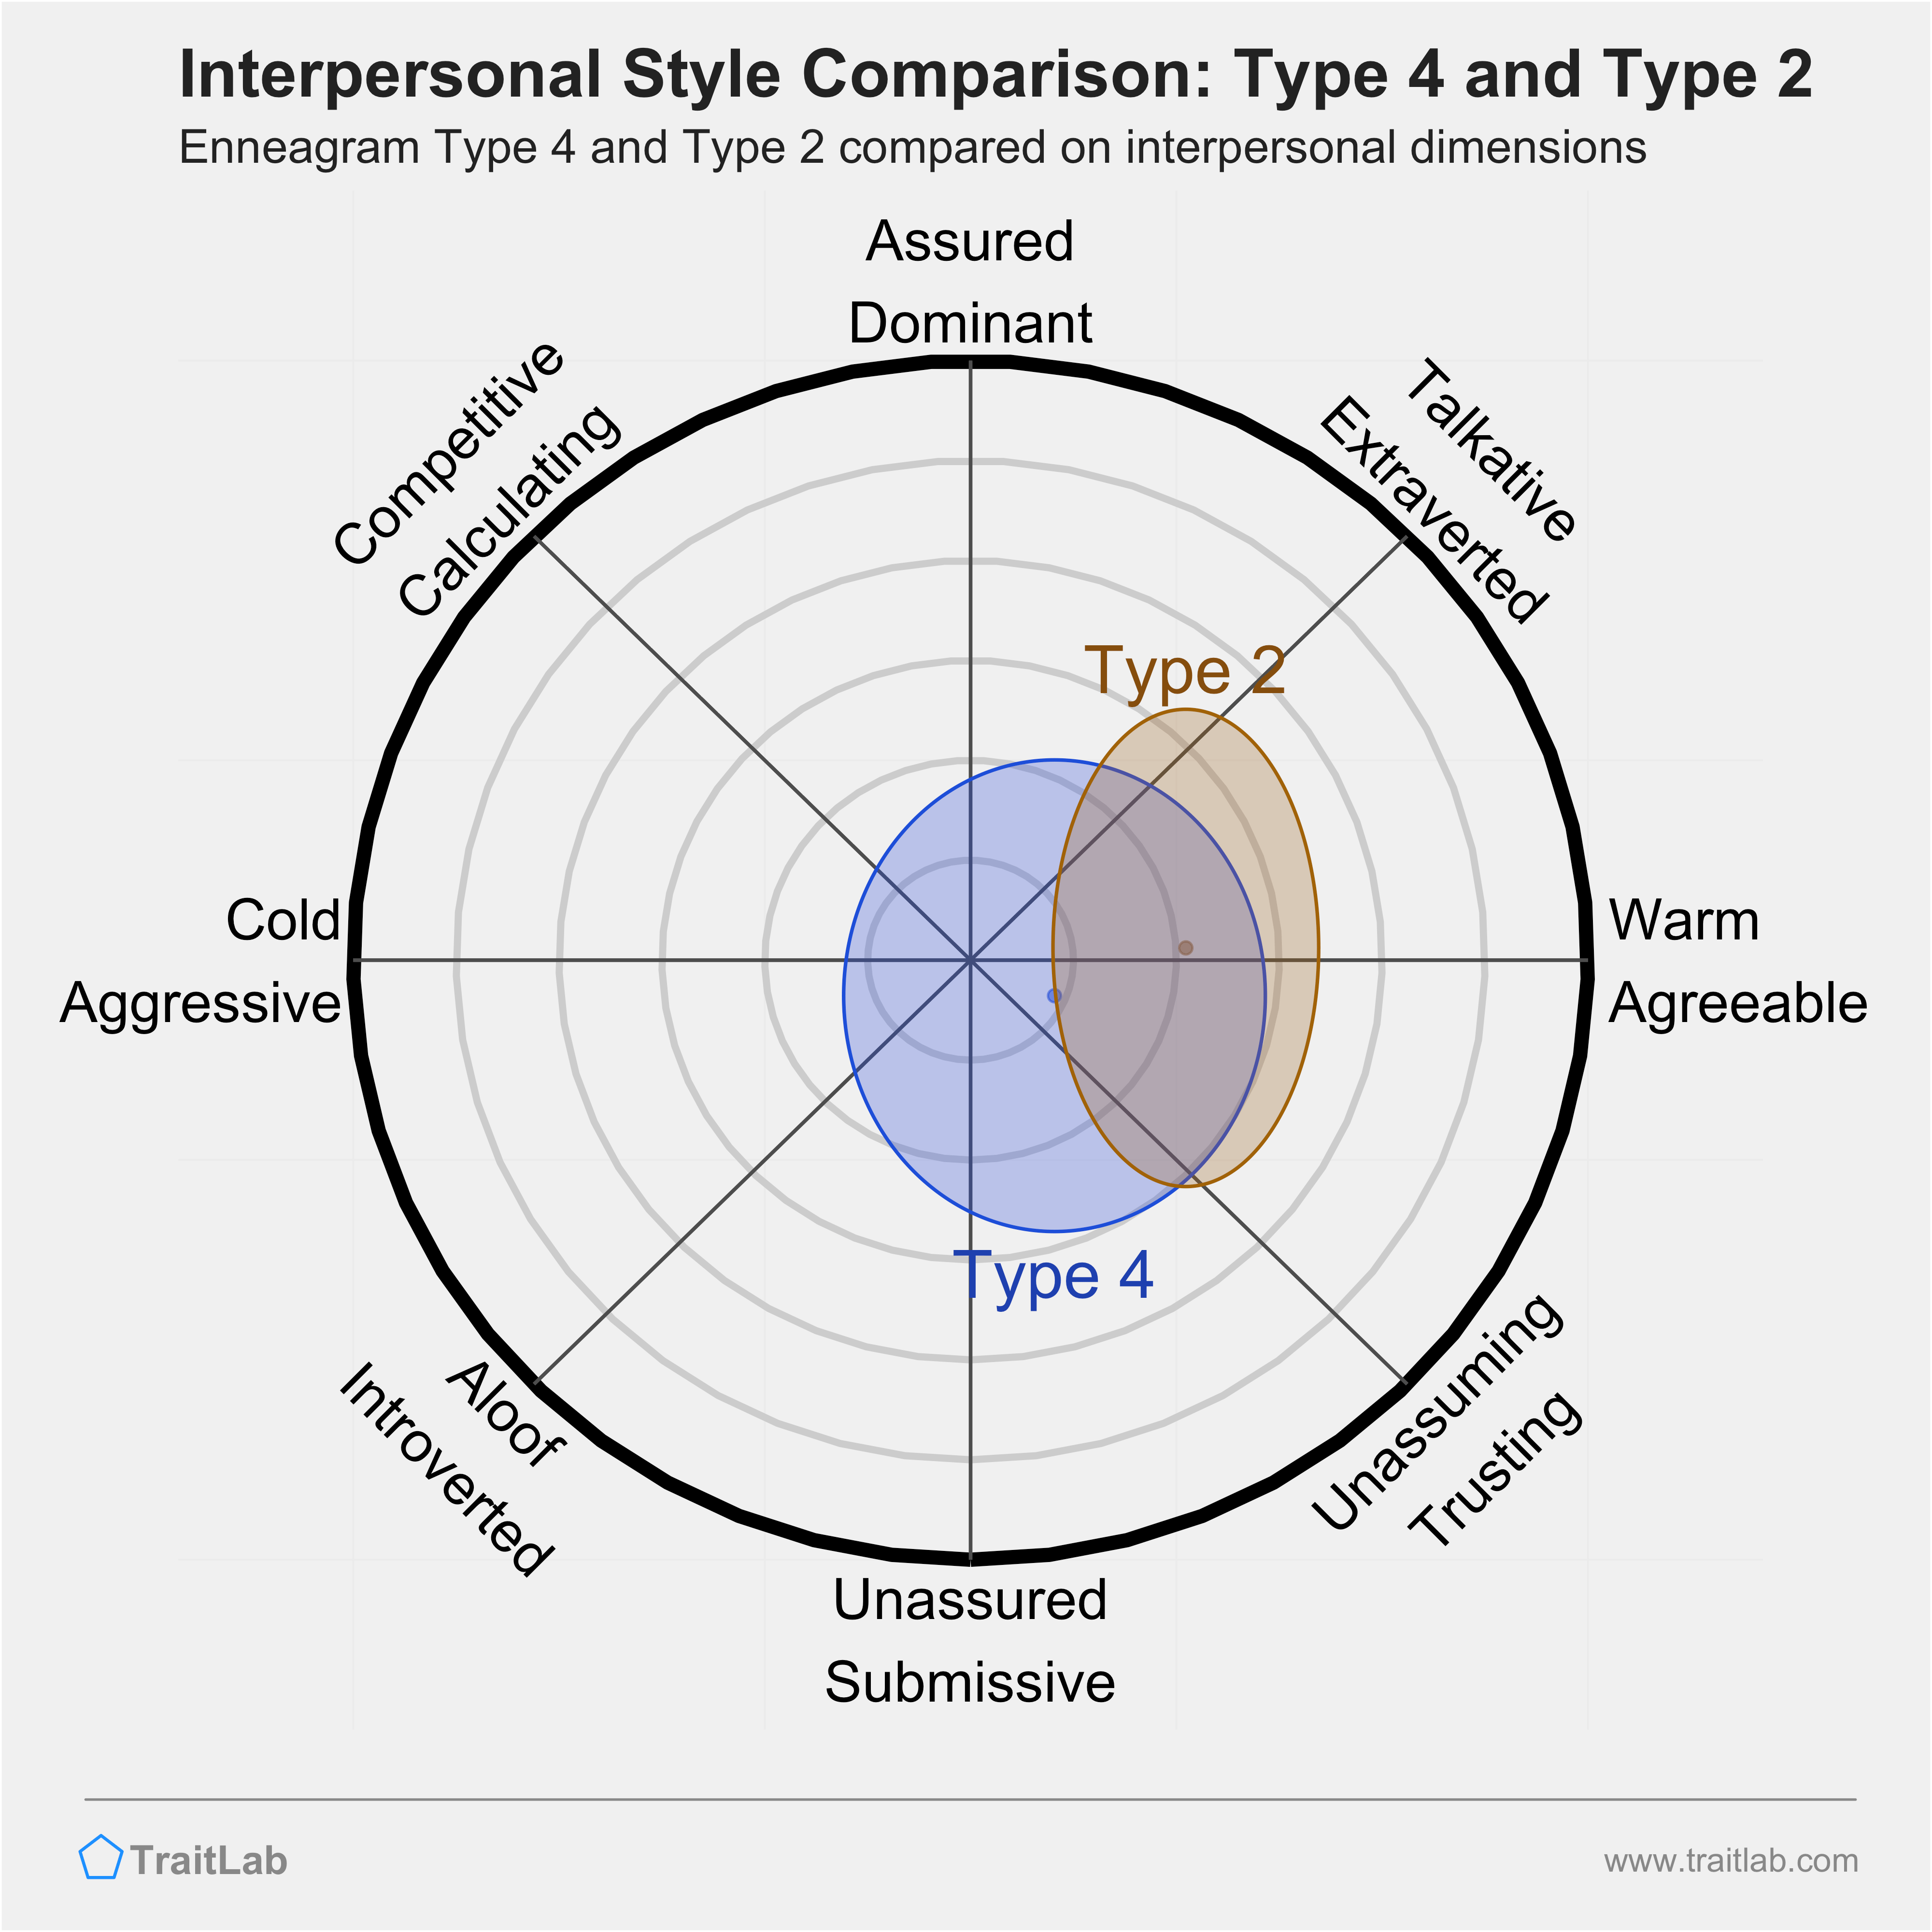 Enneagram Type 4 and Type 2 comparison across interpersonal dimensions